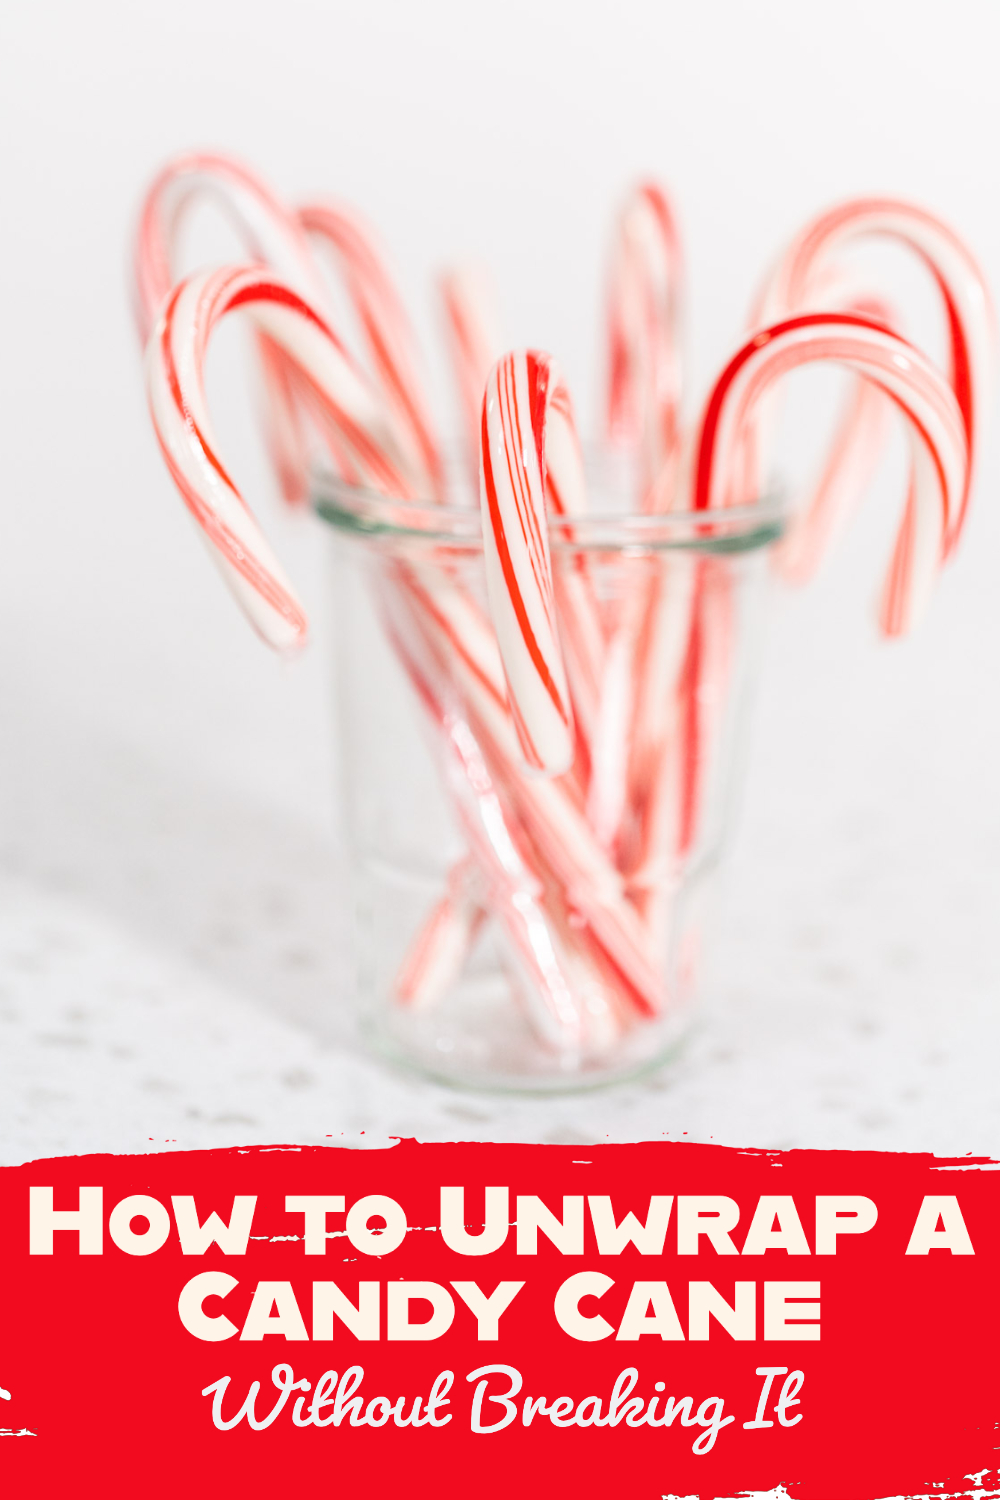 How to Unwrap a Candy Cane Without Breaking It